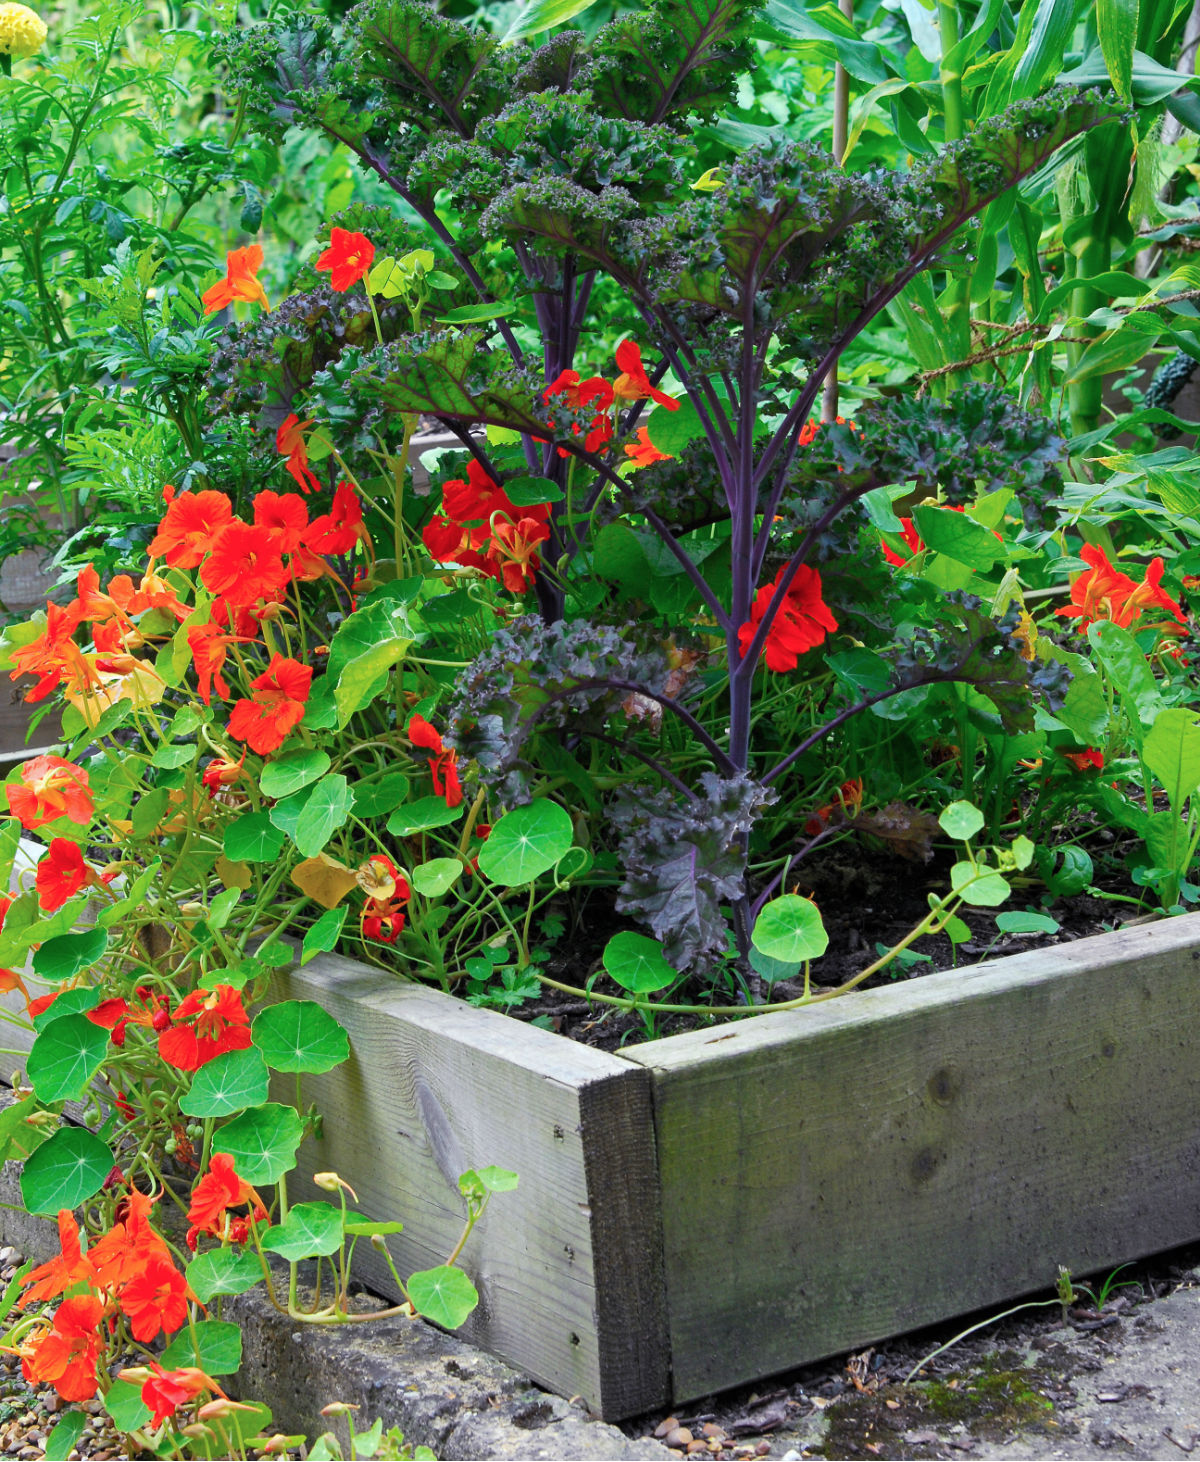 Bright red nasturtium plants flowering along side a kale plant in a raised bet.